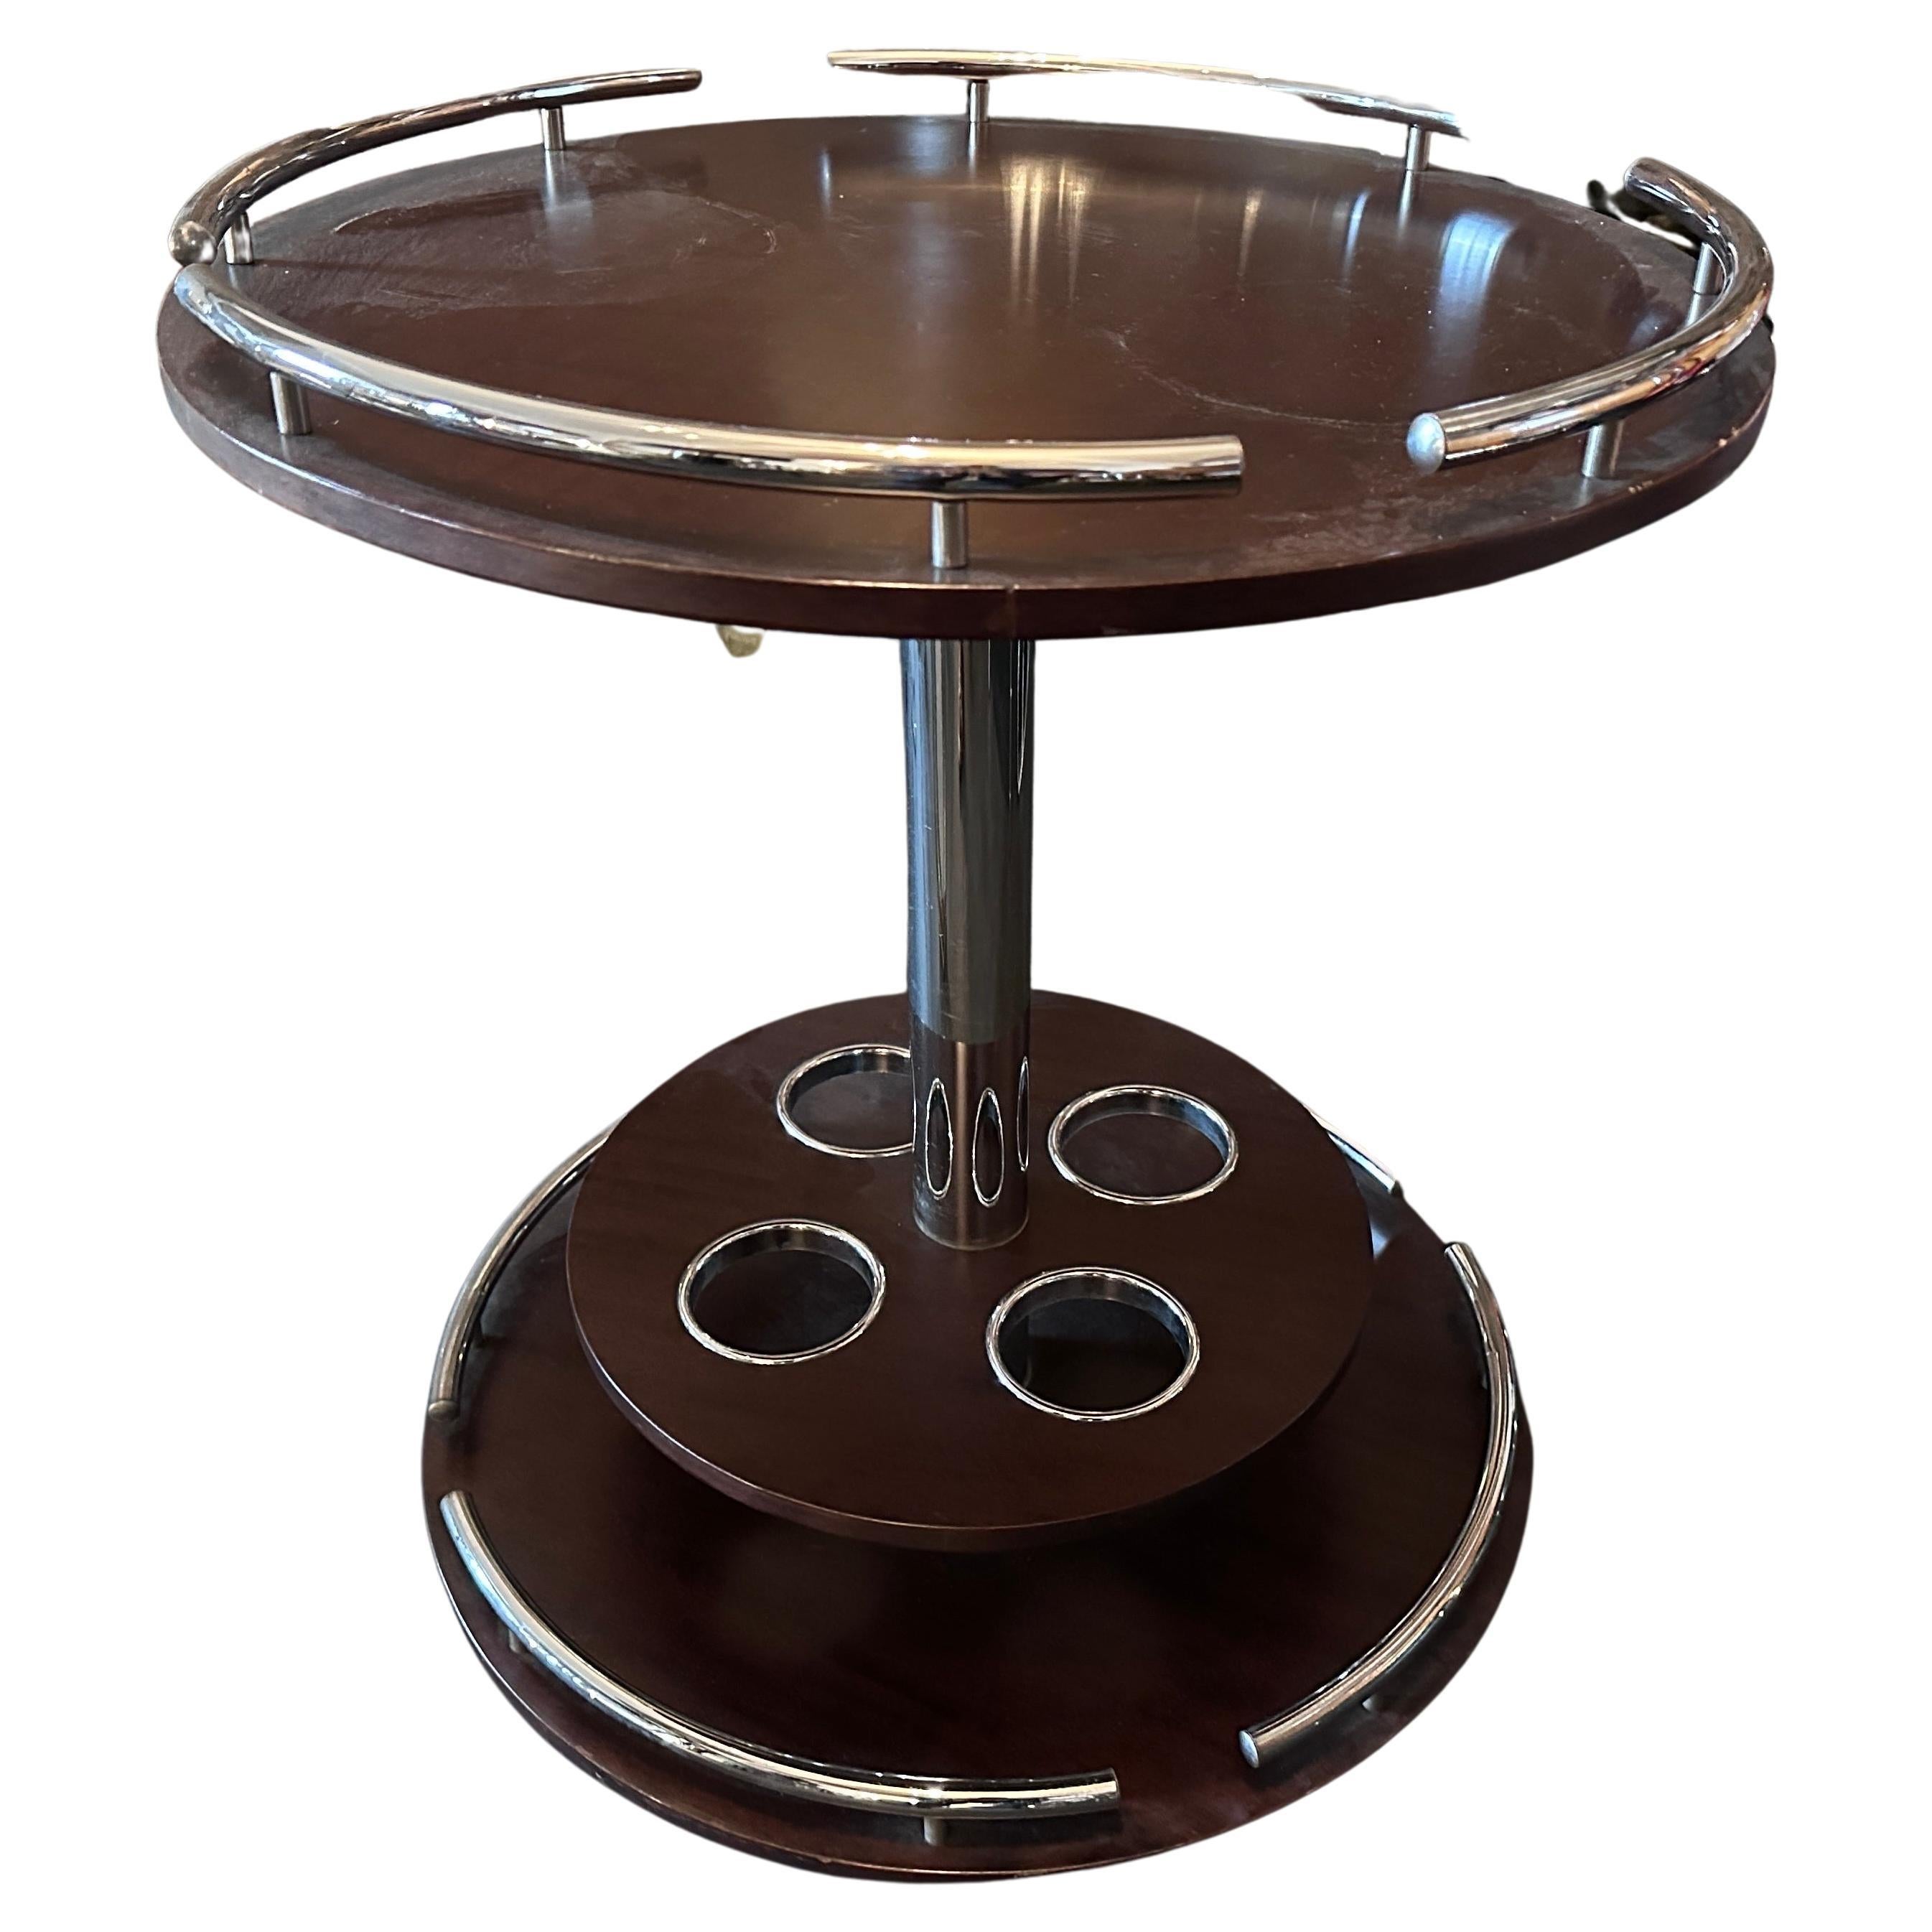 1980s Modernist Wood and Chromed Metal Italian Round Bar Cart For Sale